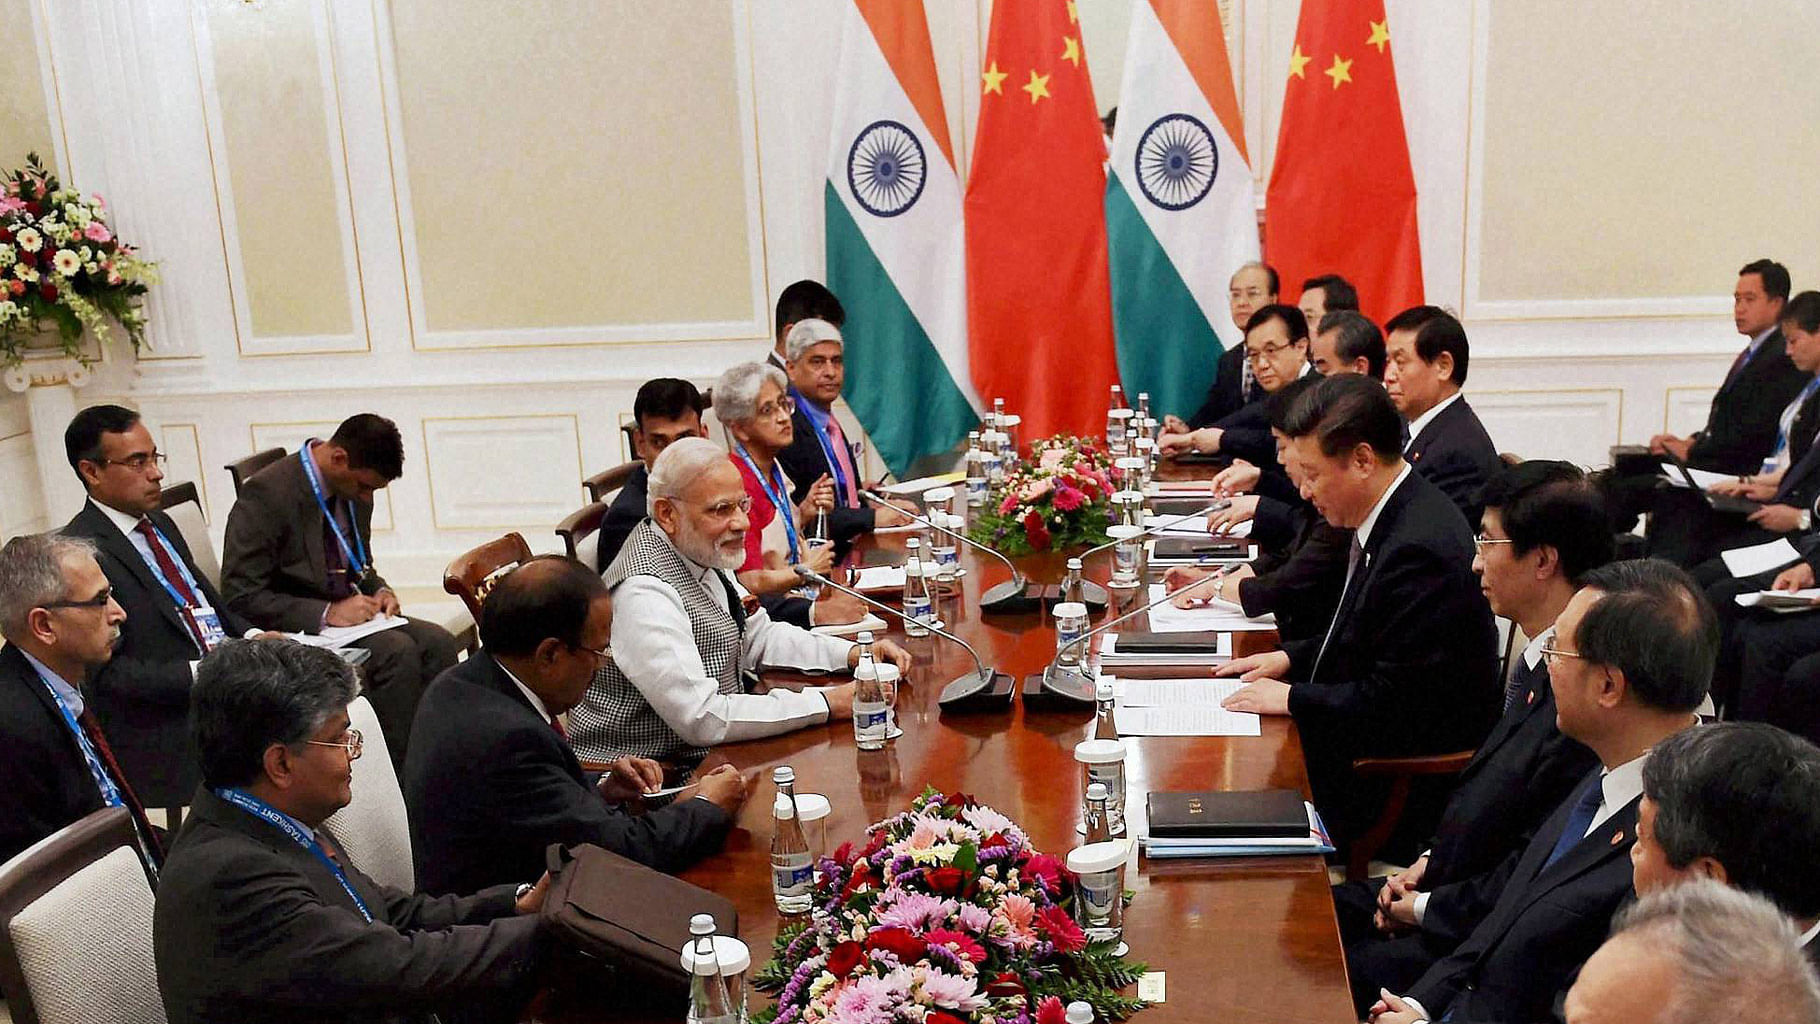  Prime Minister Narendra Modi with Chinese President Xi Jinping during a meeting in Tashkent on Thursday (Photo: PTI)